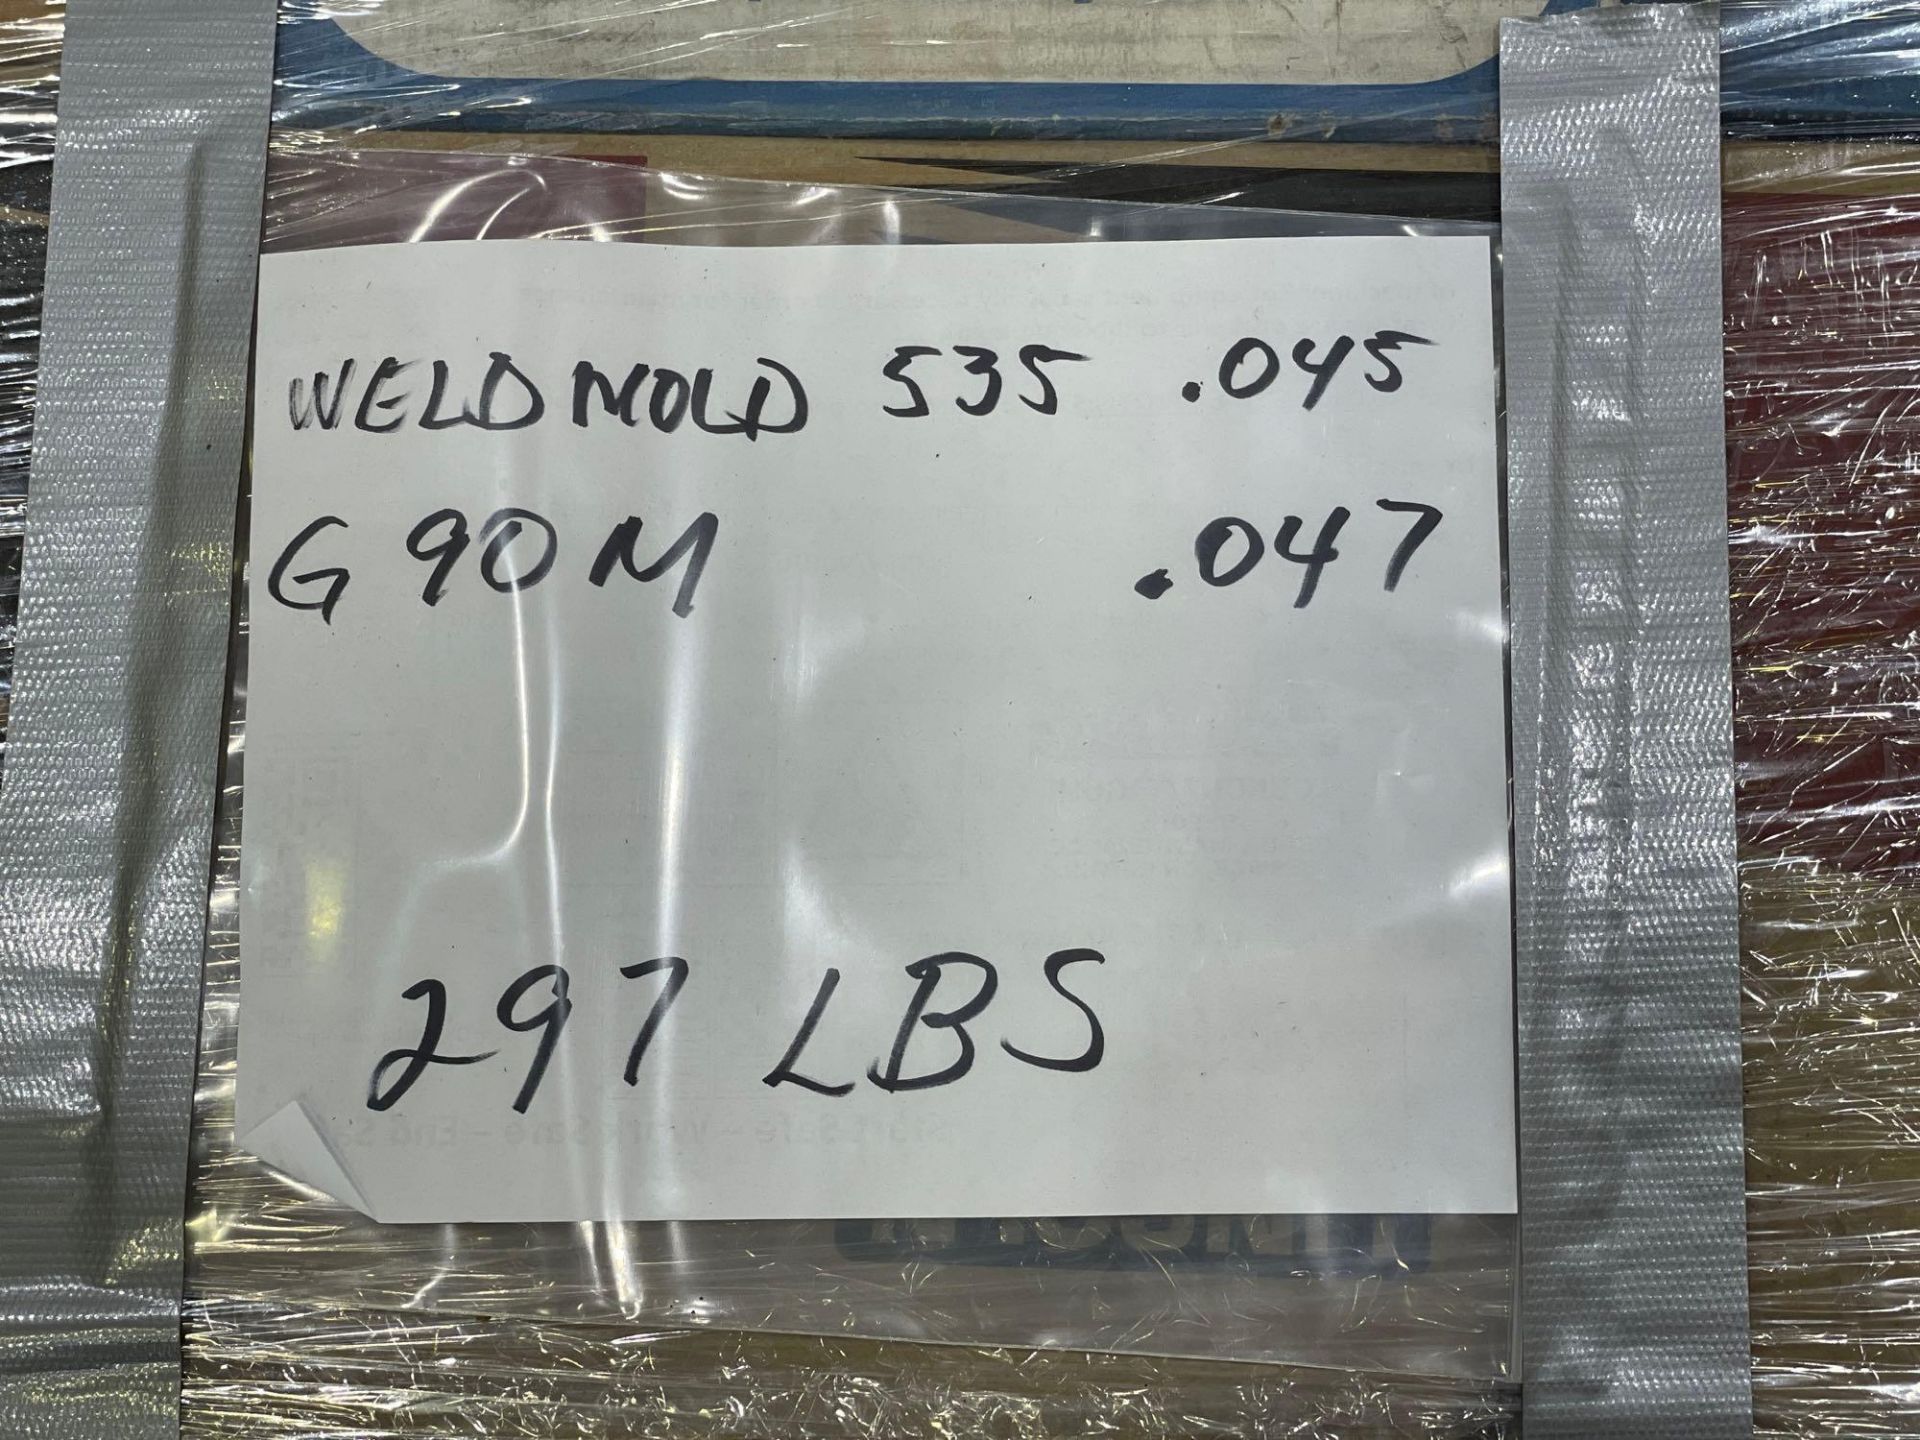 9 Boxes mixed of Weld Mold 535 .045", and G90M .047" Welding Wire - Image 2 of 4